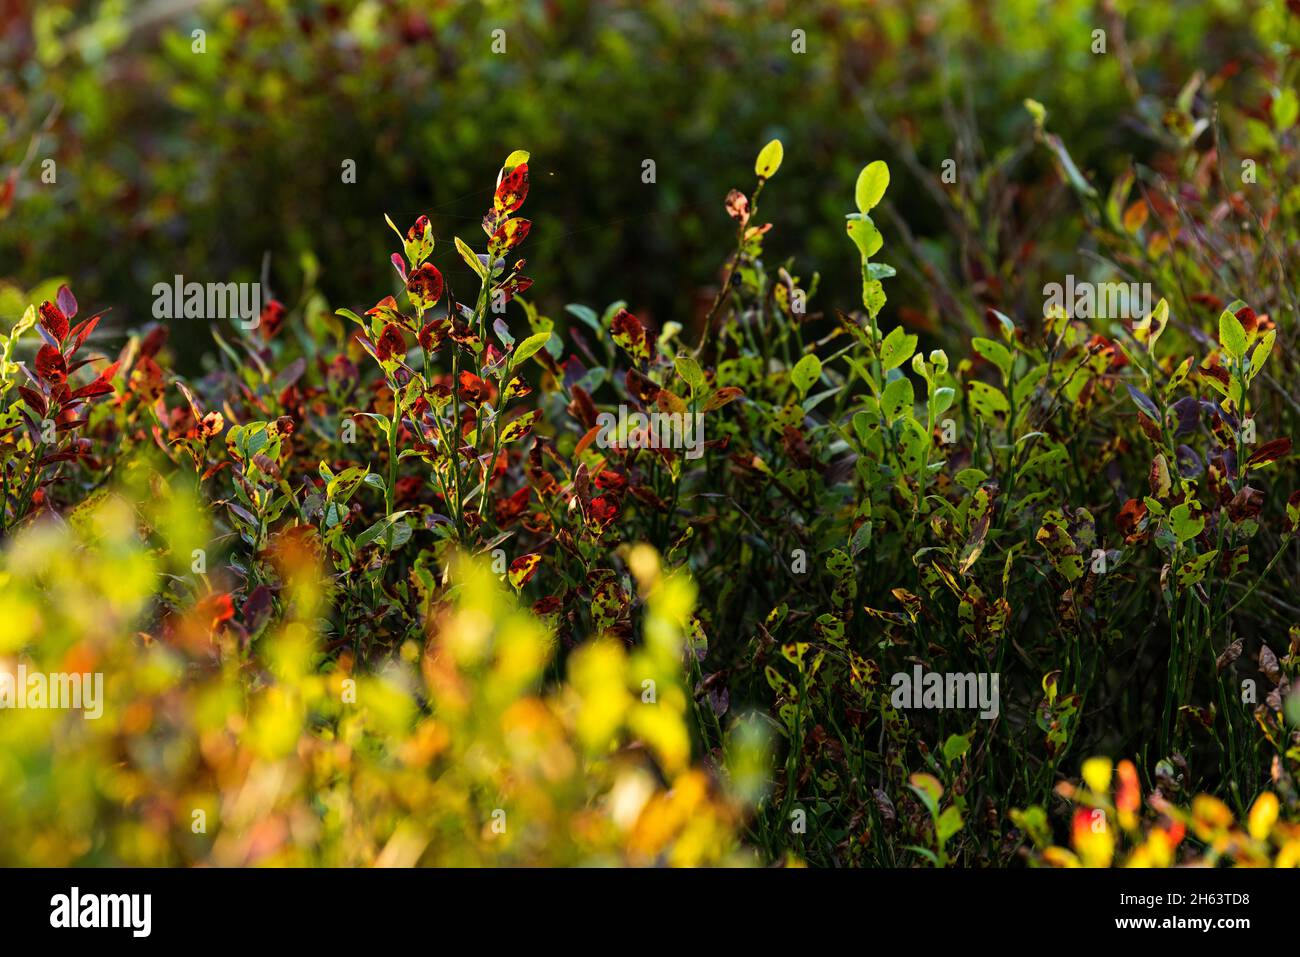 the autumn-colored foliage of the blueberry bushes glows in the evening light,steingrund,nature reserve near wilsede near bispingen,lueneburg heath nature park,germany,lower saxony Stock Photo